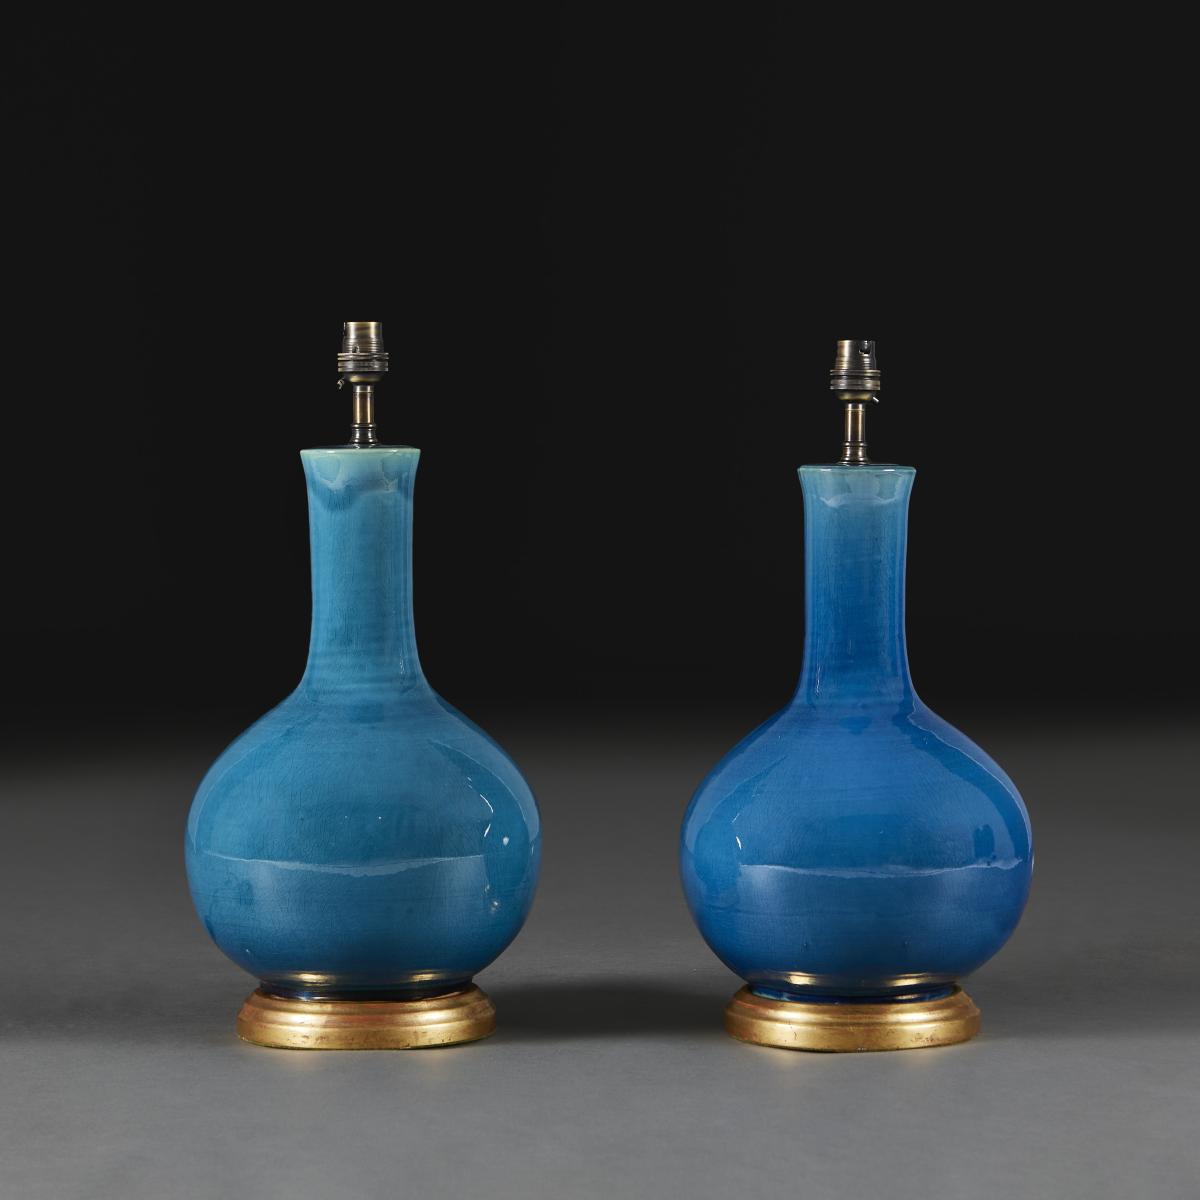 A Pair of Turquoise Monochrome Glaze Lamps